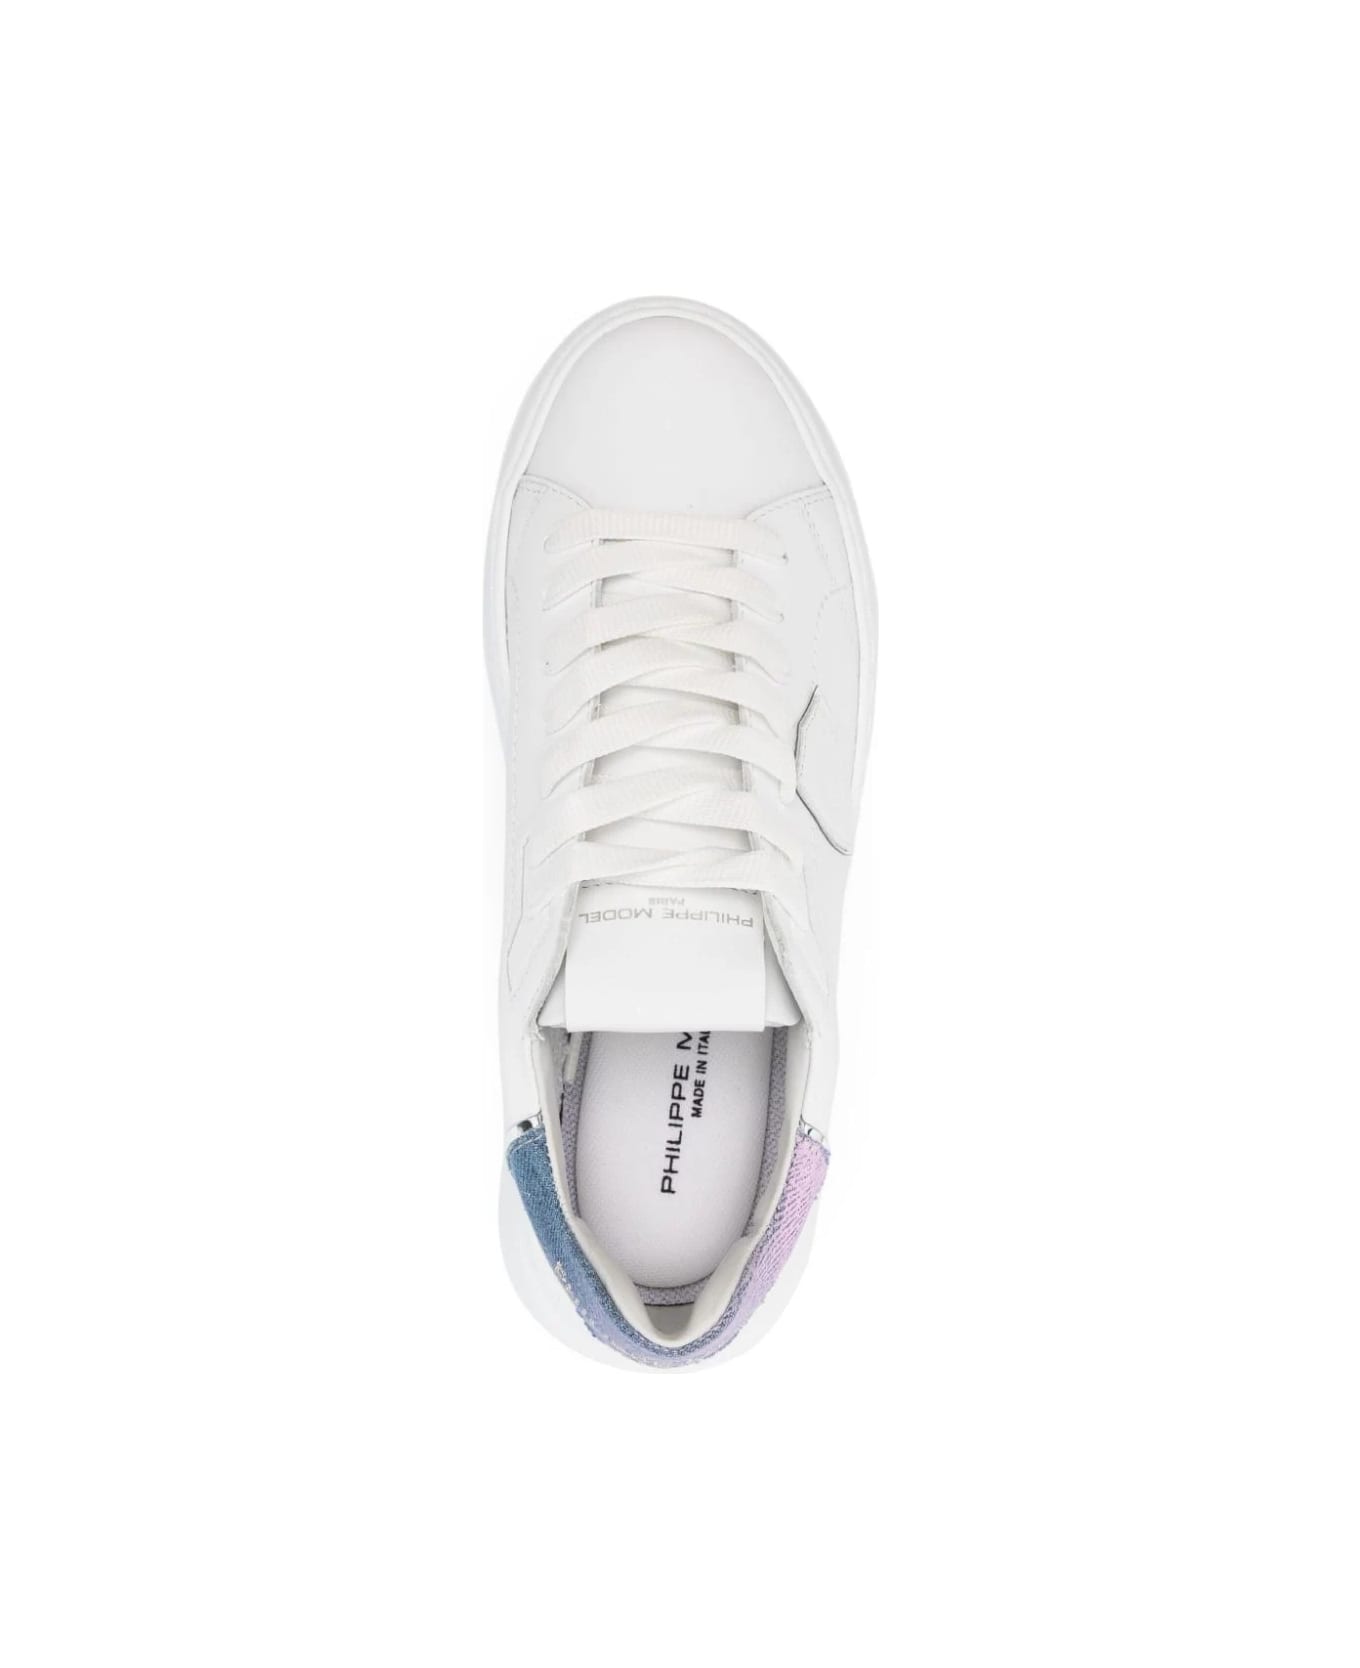 Philippe Model Tres Temple Sneakers - White And Light Blue - White